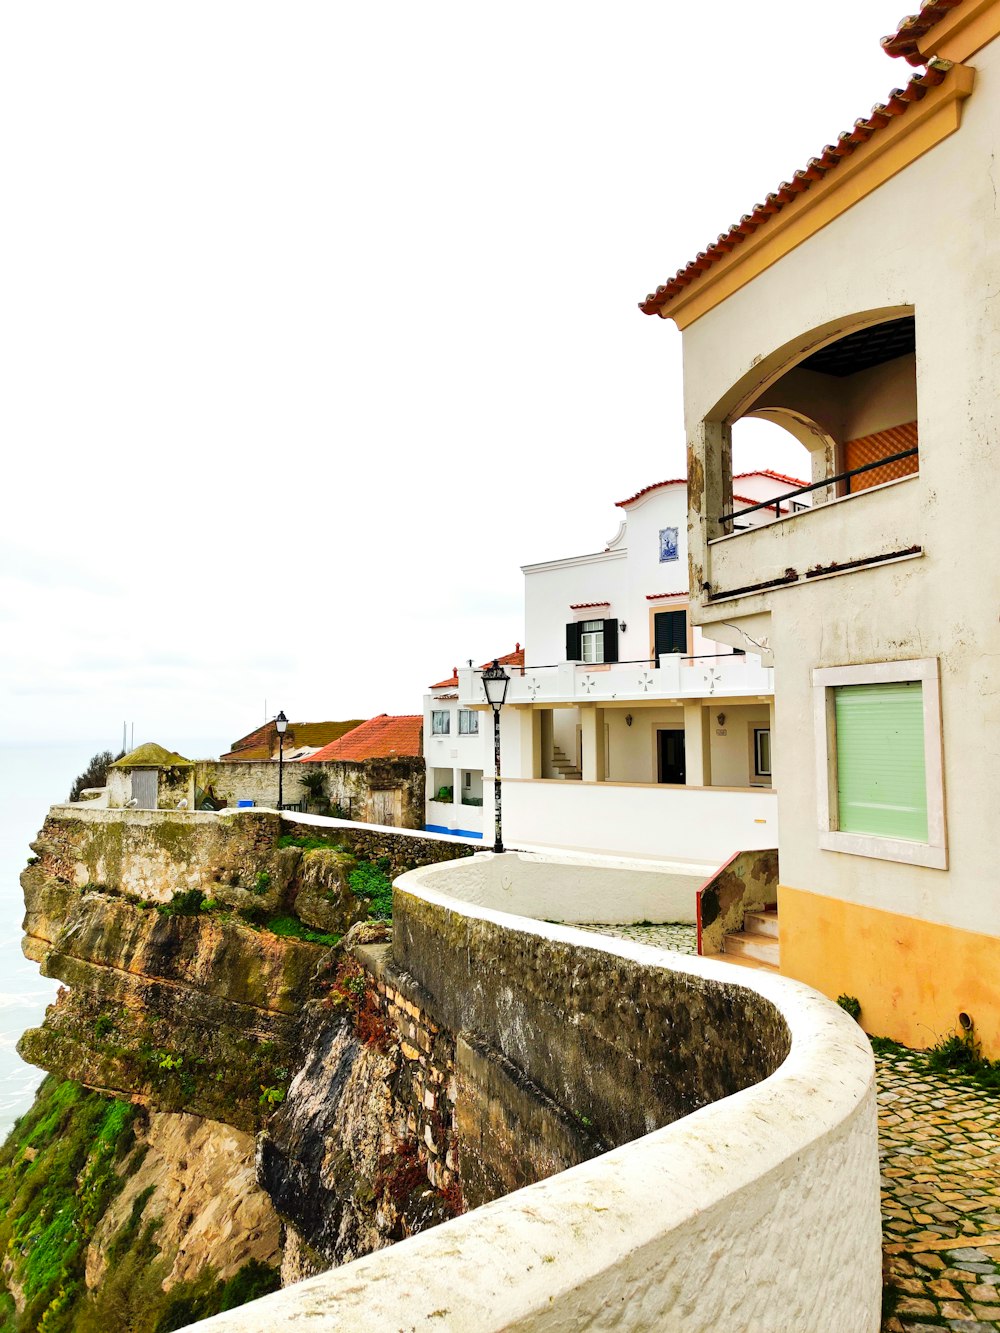 buildings on cliff during daytime